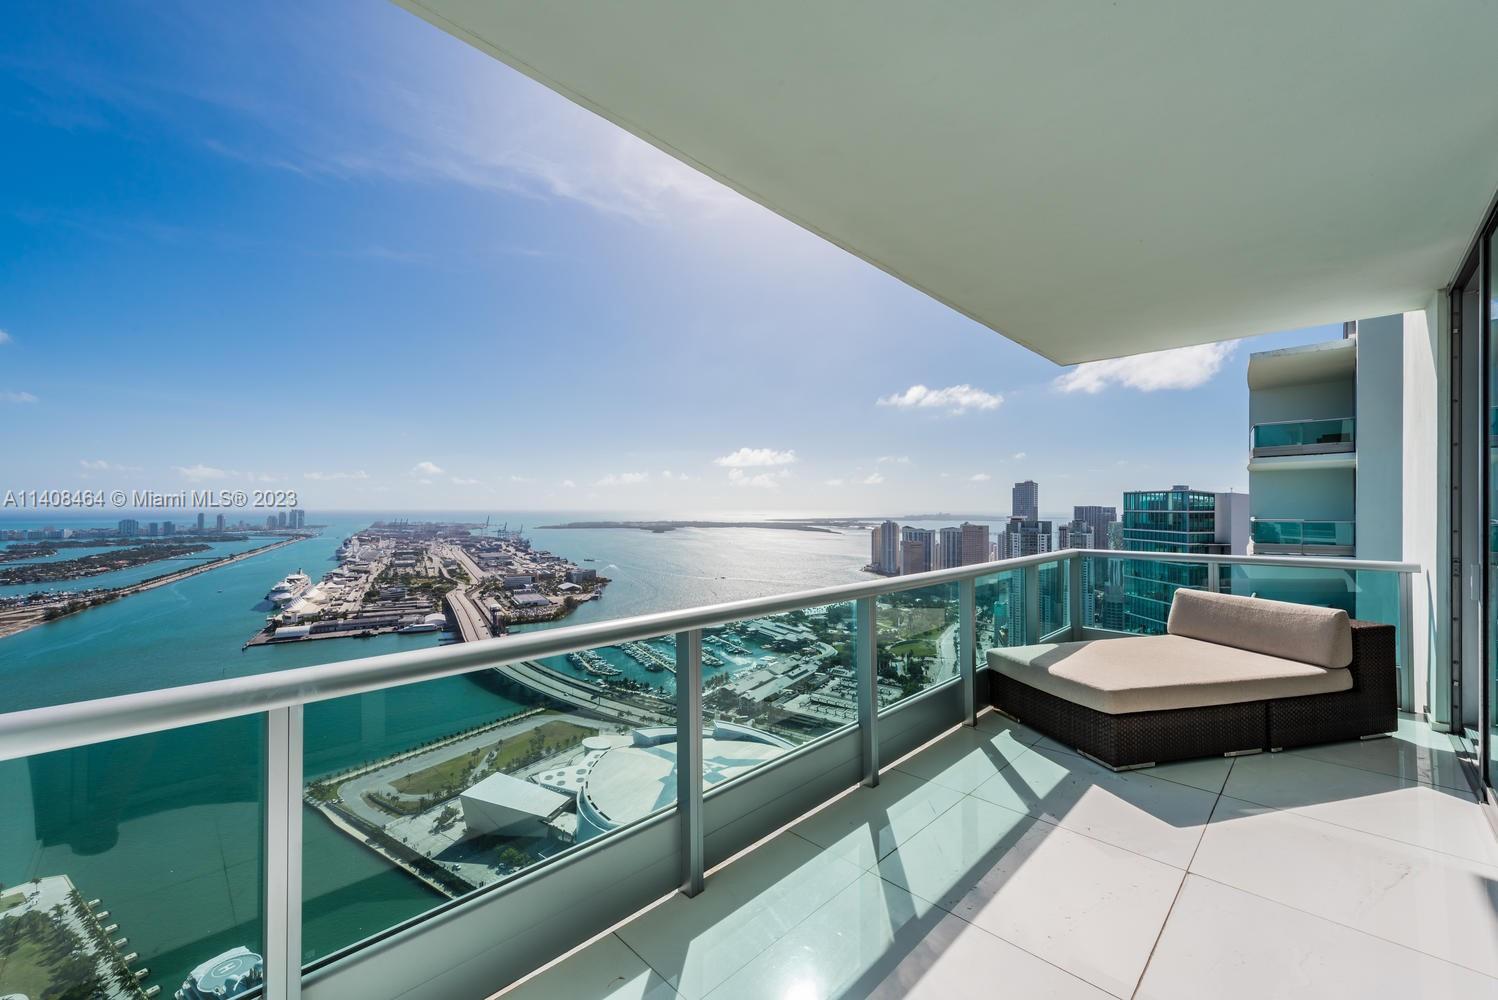 Spectacular Penthouse unit at 900 Biscayne. Feel on top of the world with Unobstructed Ocean and City Views, Deep Balconies offer authentic inside-outside living. Features include a Private Elevator, foyer, Art, white glass floors, custom wood paneling, custom wood doors, modern furniture, LED wall-mounted TVs, and 1parking space.  All the luxury of a high-end building with 5-star amenities including a SPA, state-of-the-art fitness center, theater, billiard room, lounge, business center, lounge pool, lap pool, sauna, steam room, 24-hour concierge service Excellent location in Downtown Miami, near Restaurants, Parks, Miami Beach, Brickell, Museums, Art Center, and Miami Int’l Airport. Easy access to I-95.